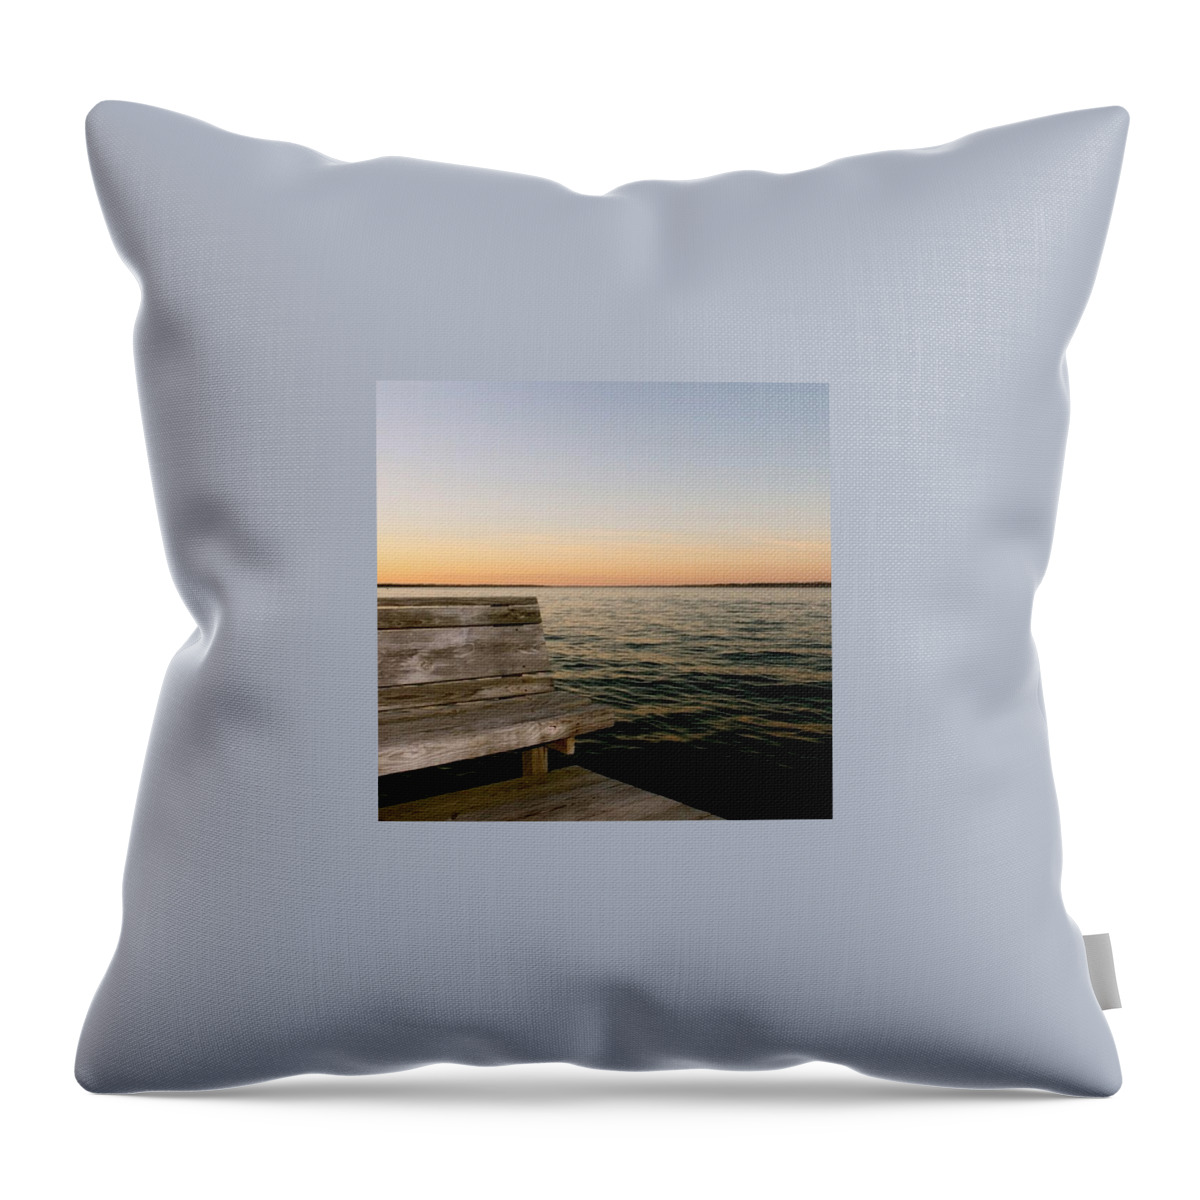 Bench Throw Pillow featuring the photograph Bench And Deck In Light by Justin Connor